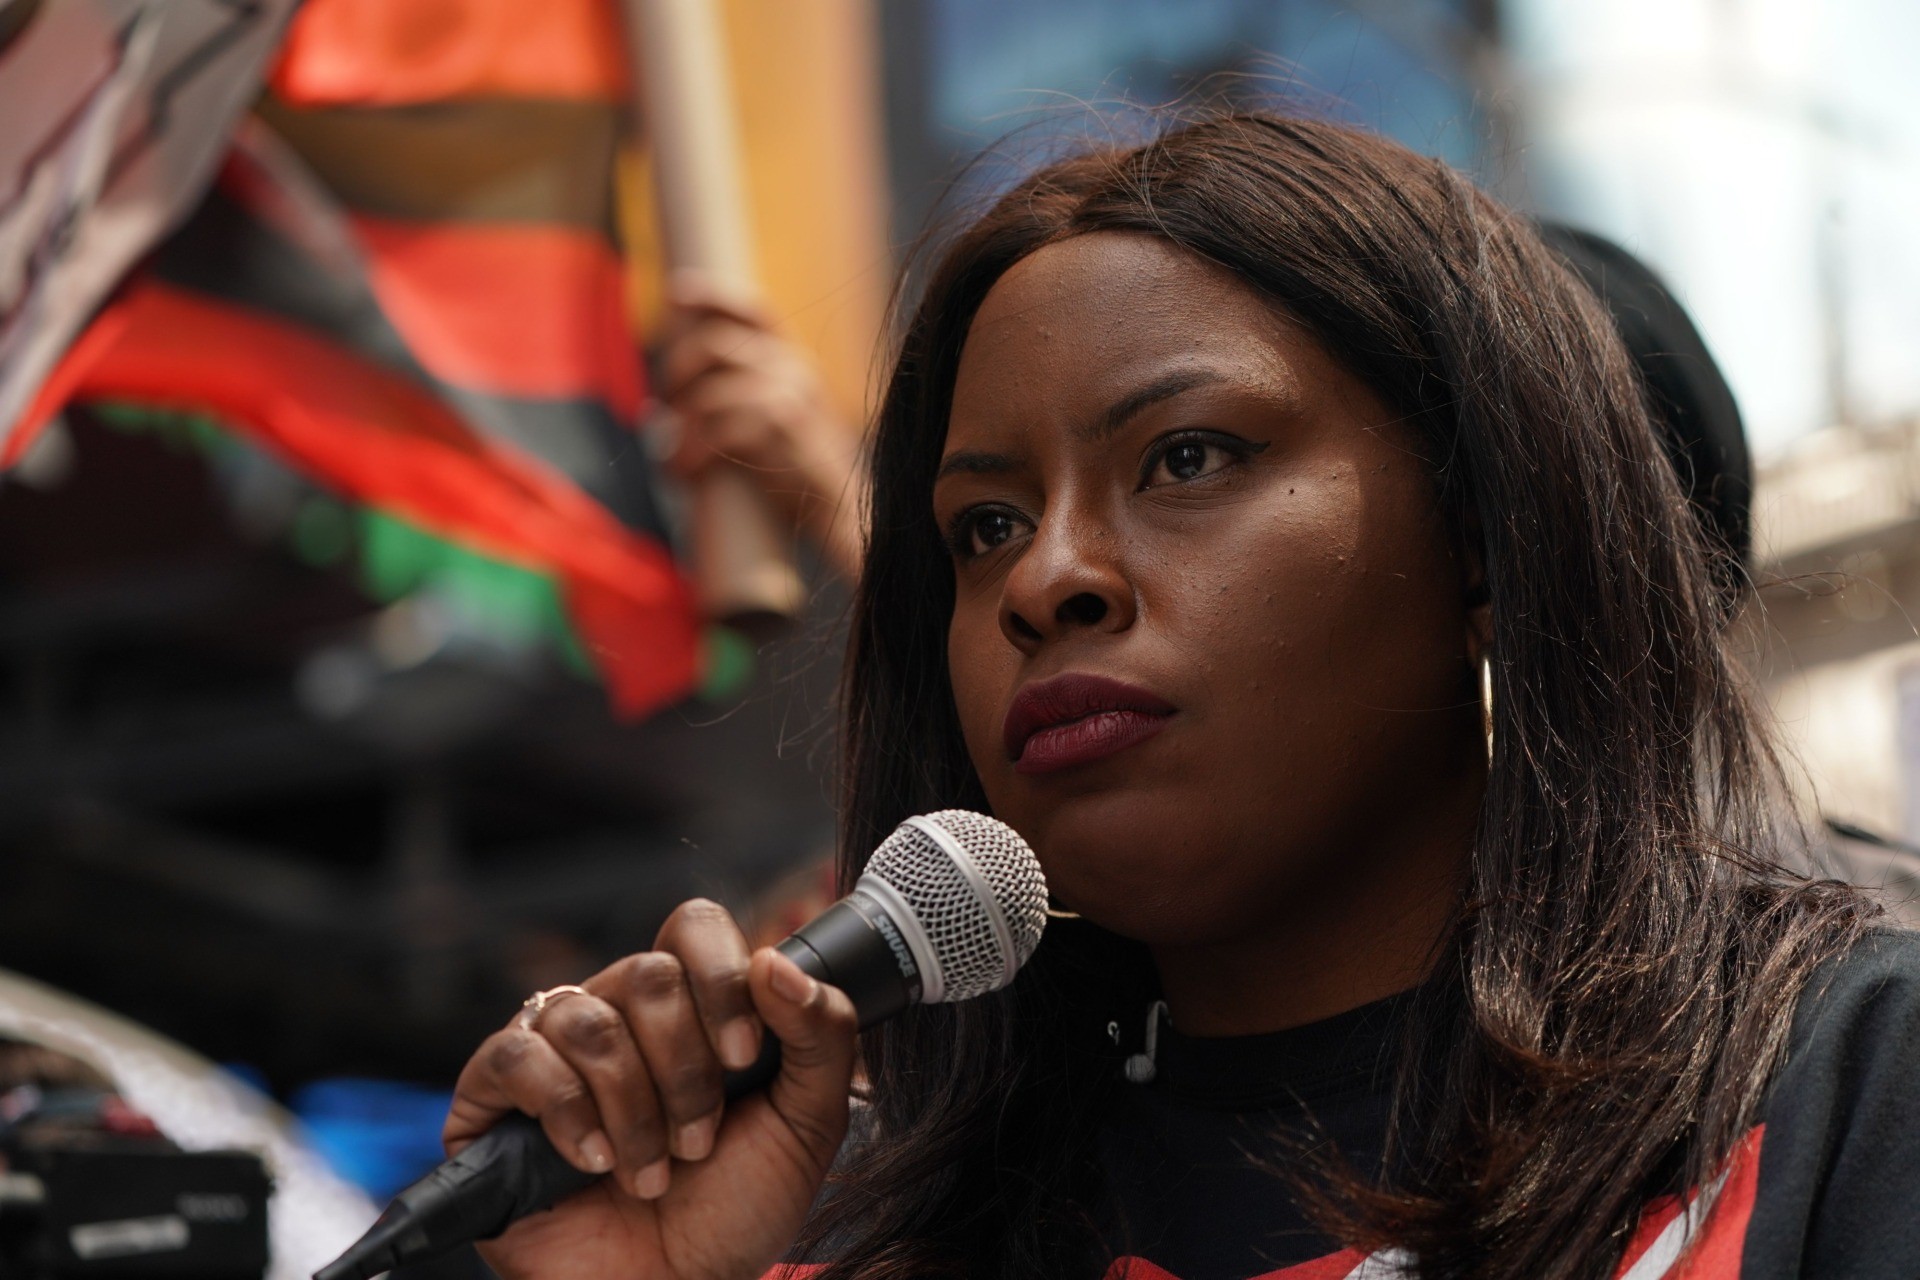 "Black Lives Matter" New York co-founder Chivona Newsome leads protesters as they demonstrate in Times Square over the death of George Floyd by a Minneapolis police officer on June 7, 2020 in New York. - On May 25, 2020, Floyd, a 46-year-old black man suspected of passing a counterfeit $20 bill, died in Minneapolis after Derek Chauvin, a white police officer, pressed his knee to Floyd's neck for almost nine minutes. (Photo by Bryan R. Smith / AFP) (Photo by BRYAN R. SMITH/AFP via Getty Images)